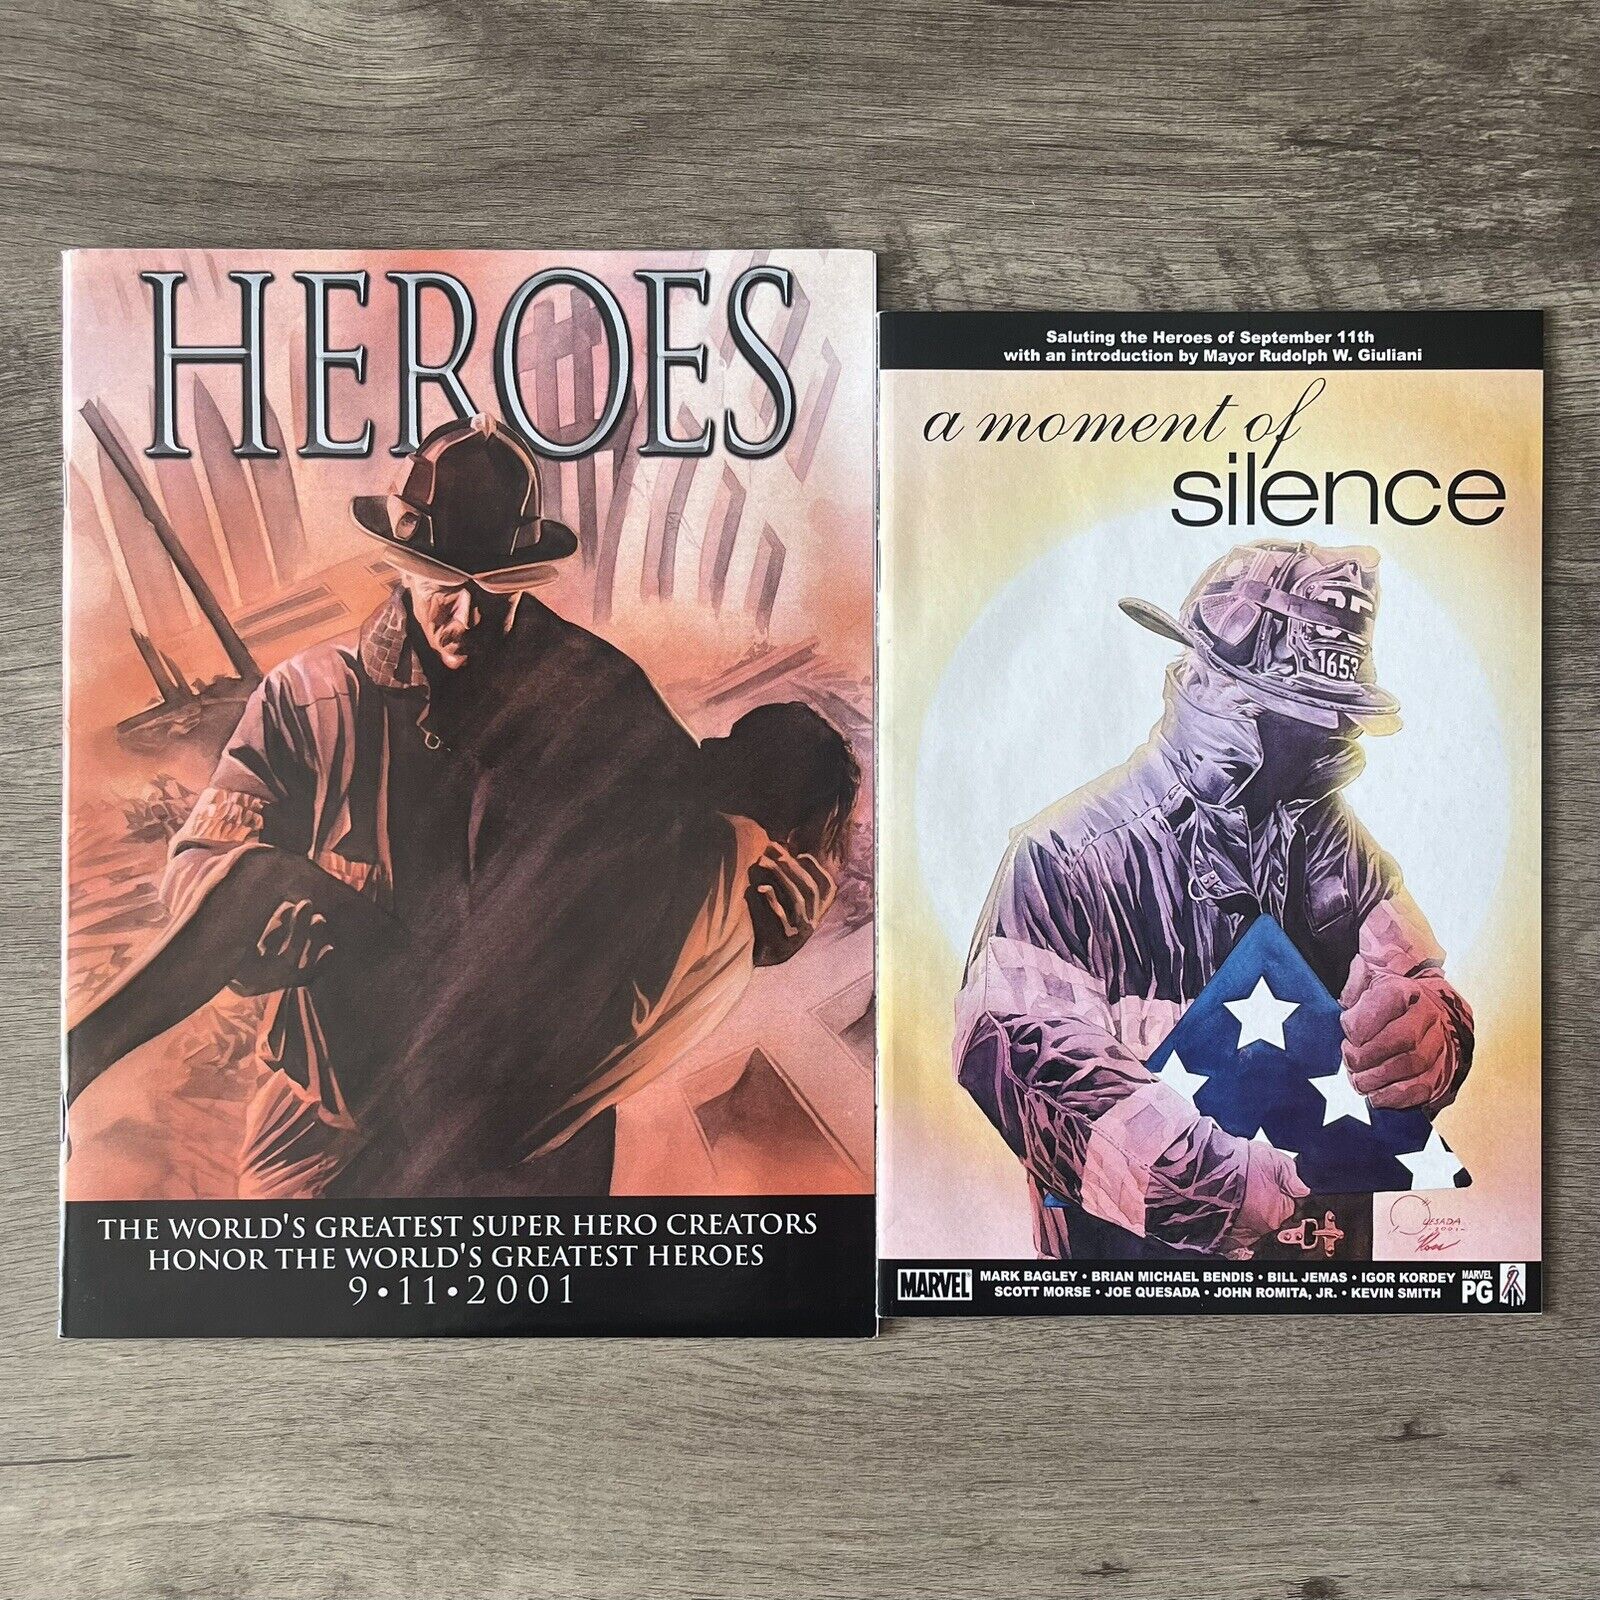 Marvel Comics A Moment of Silence & Heroes 9/11 2001 Tribute